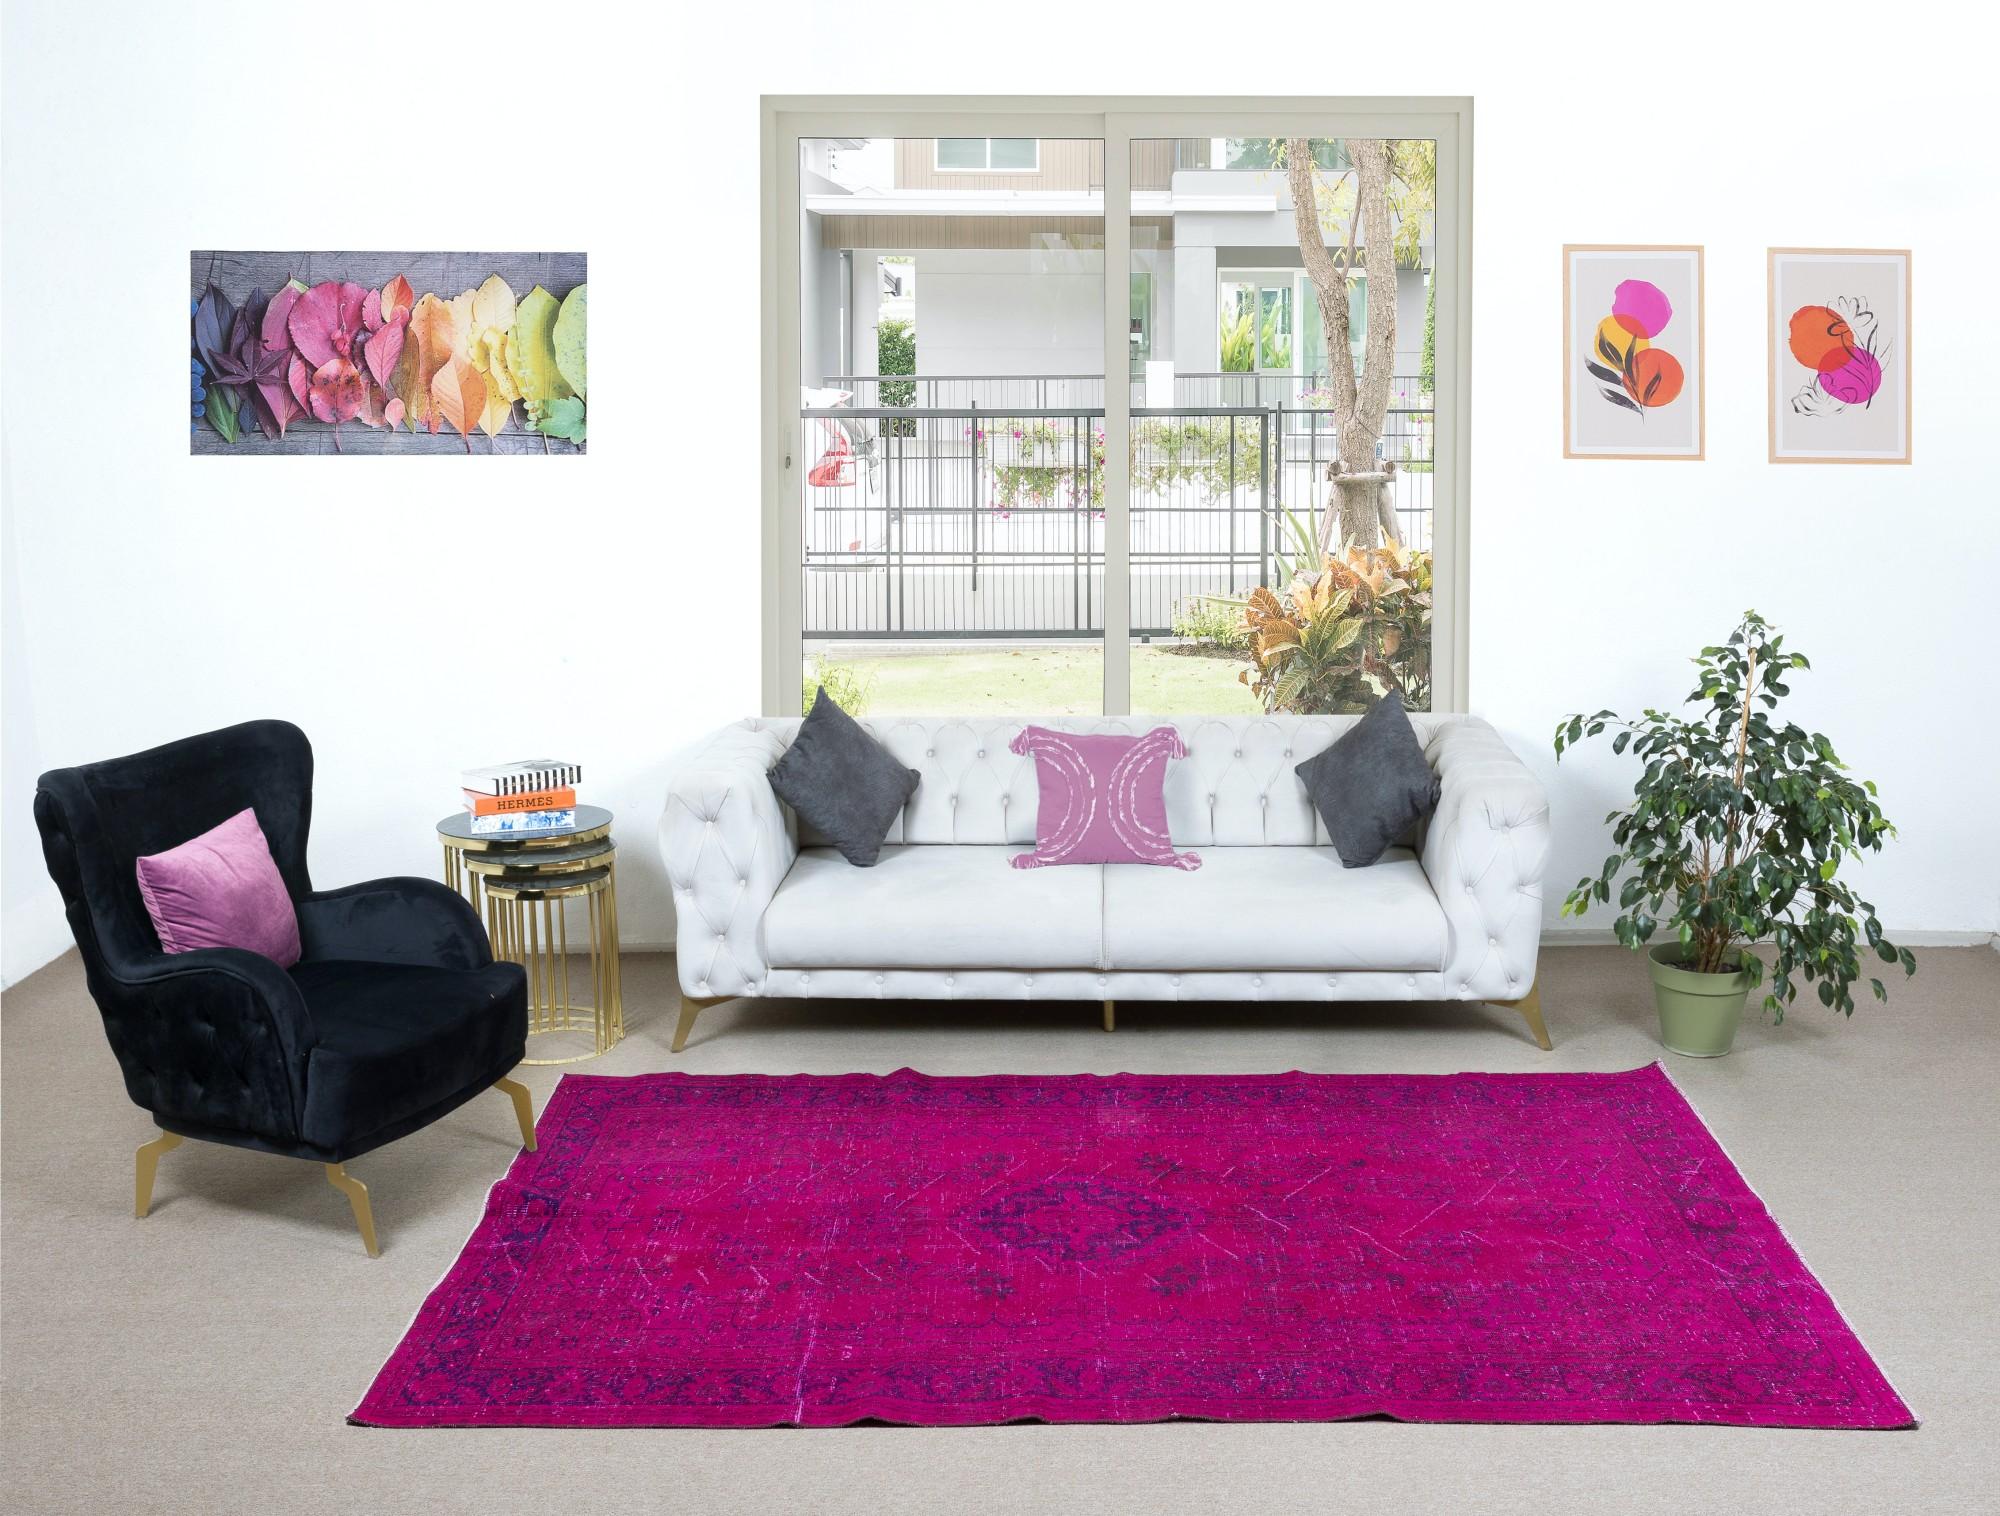 Turkish 6x9.8 Ft Contemporary Pink Area Rug, Handmade in Turkey, Living Room Carpet For Sale